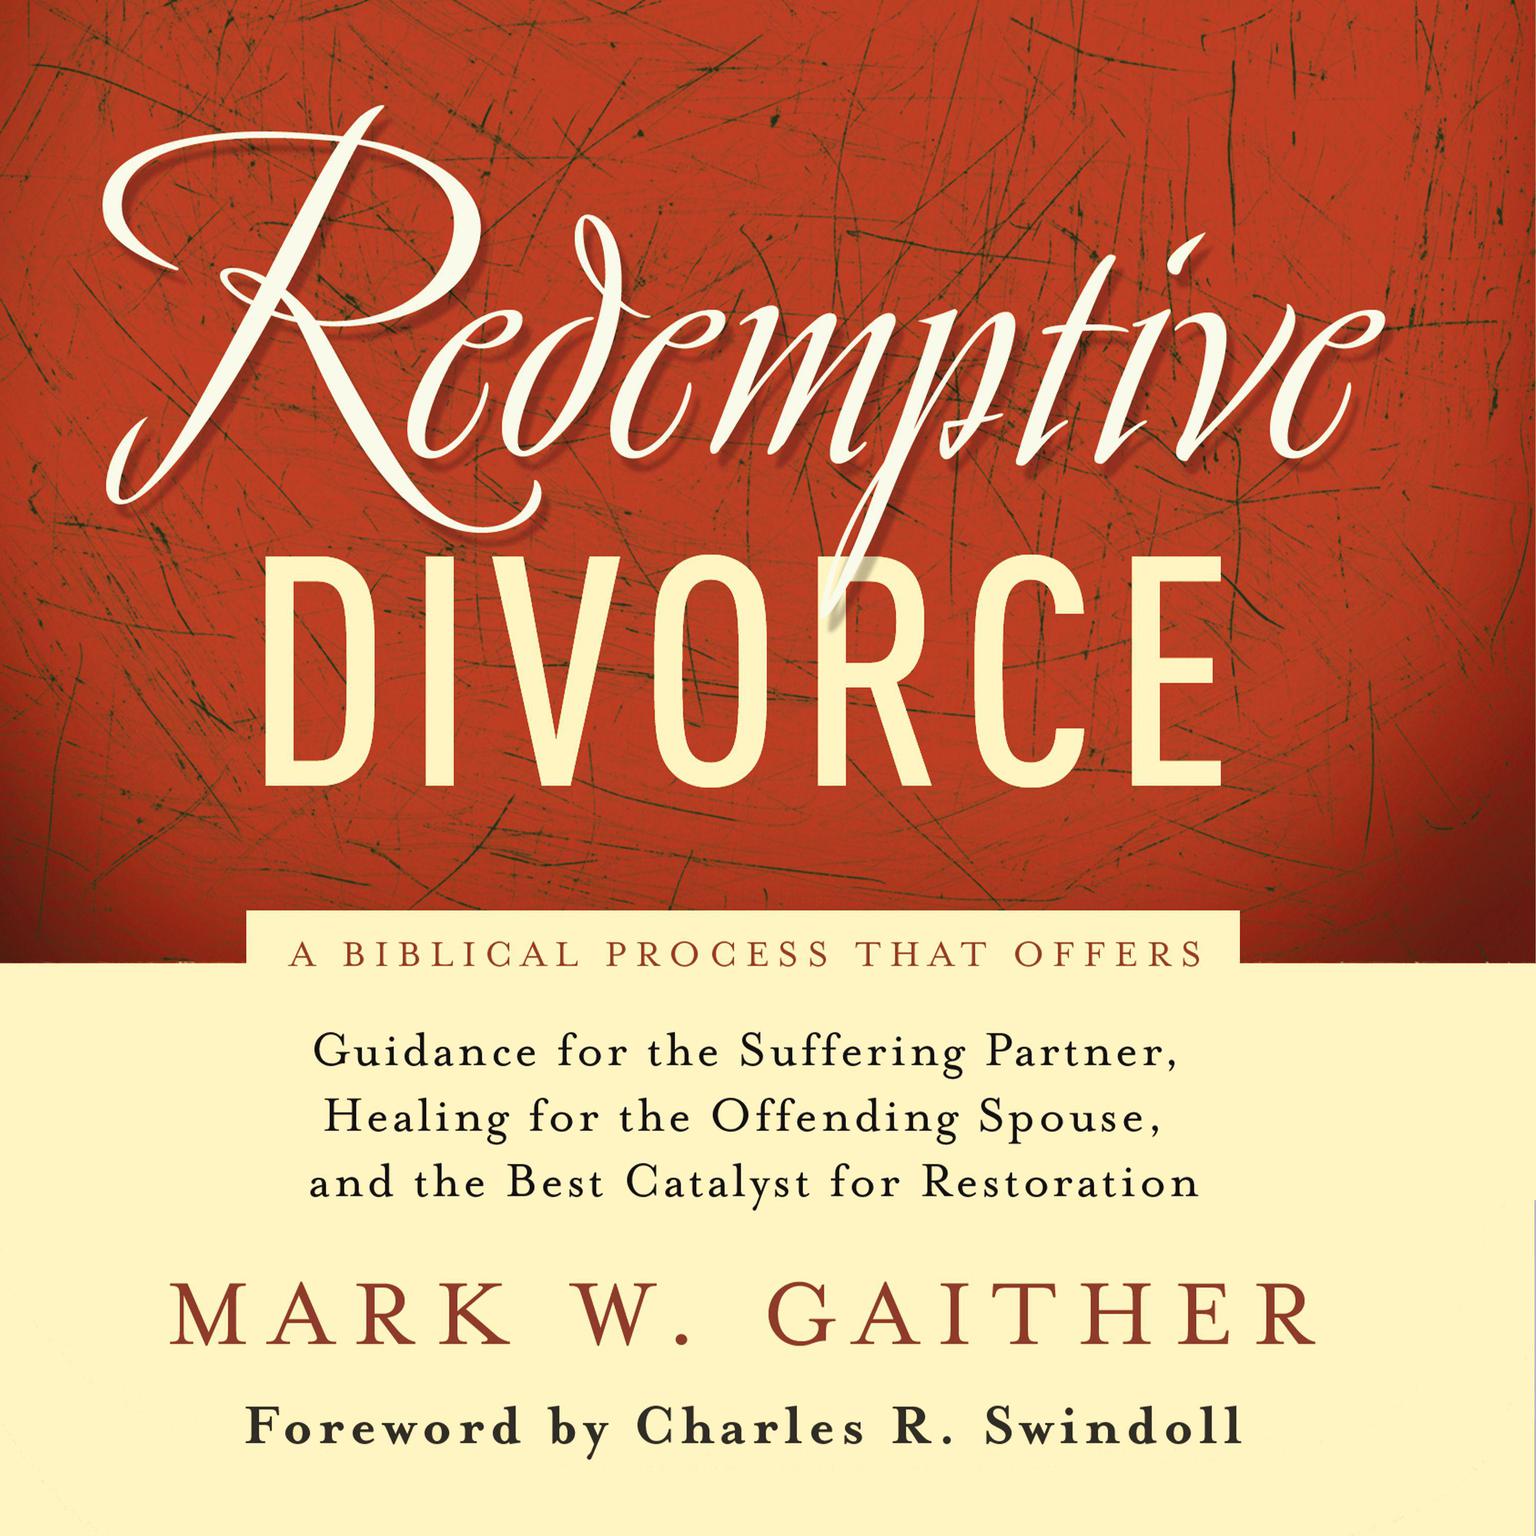 Redemptive Divorce: A Biblical Process that Offers Guidance for the Suffering Partner, Healing for the Offending Spouse, and the Best Catalyst for Restoration Audiobook, by Mark Gaither